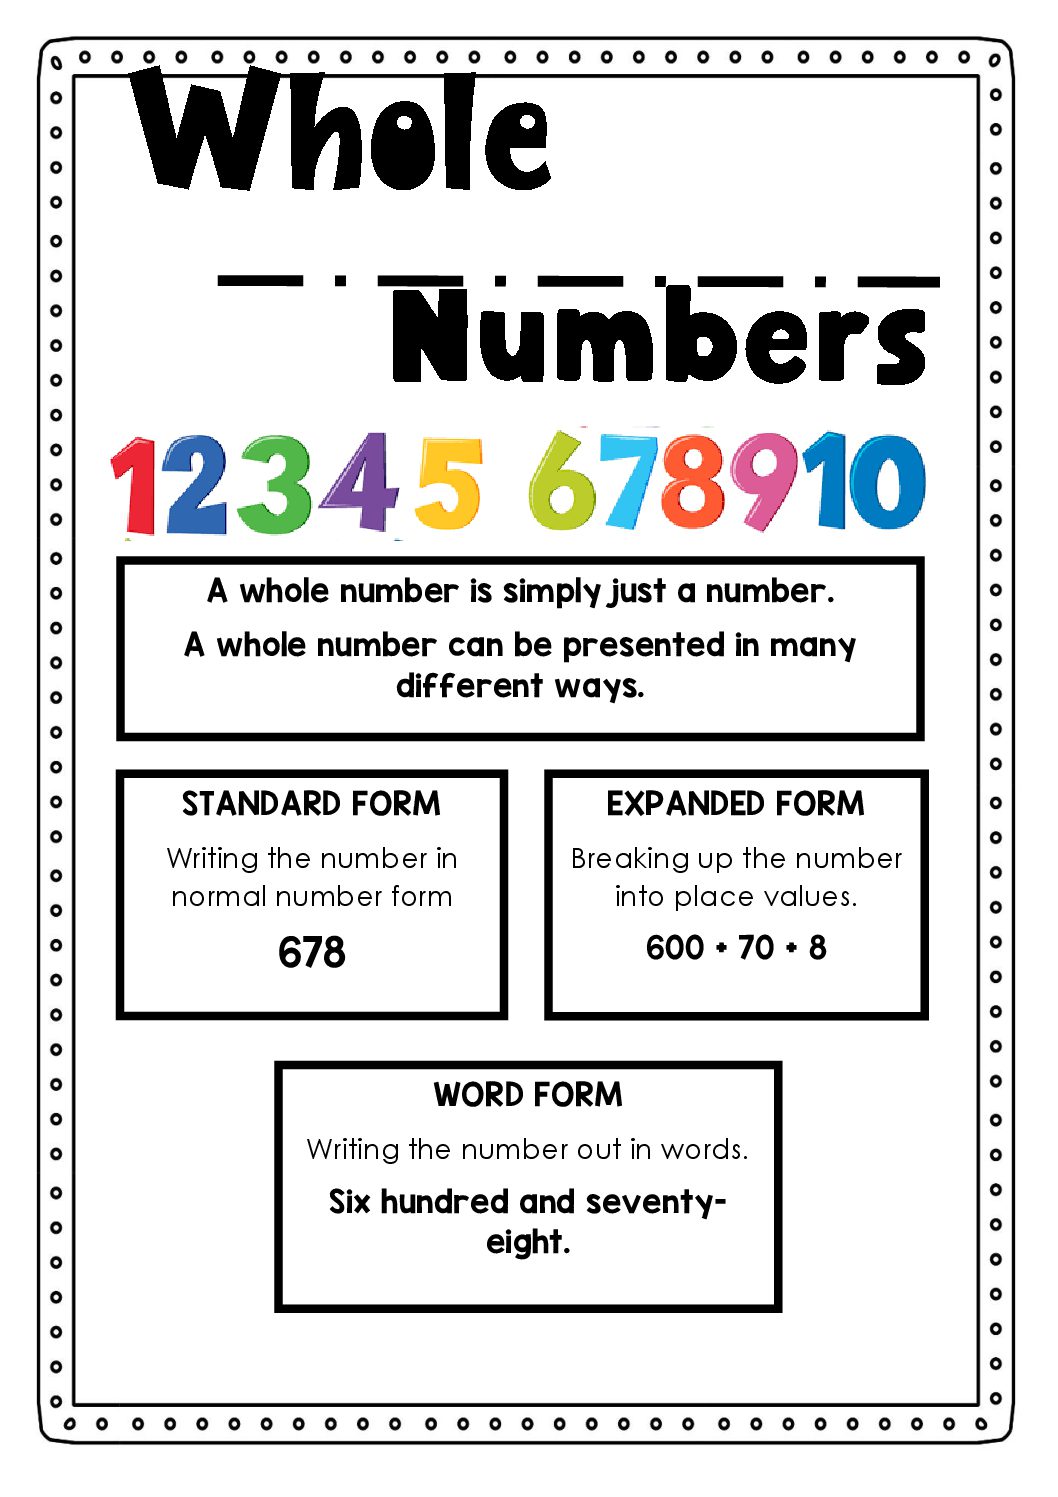 Whole Numbers Week 1 Anchor Chart Pdf 